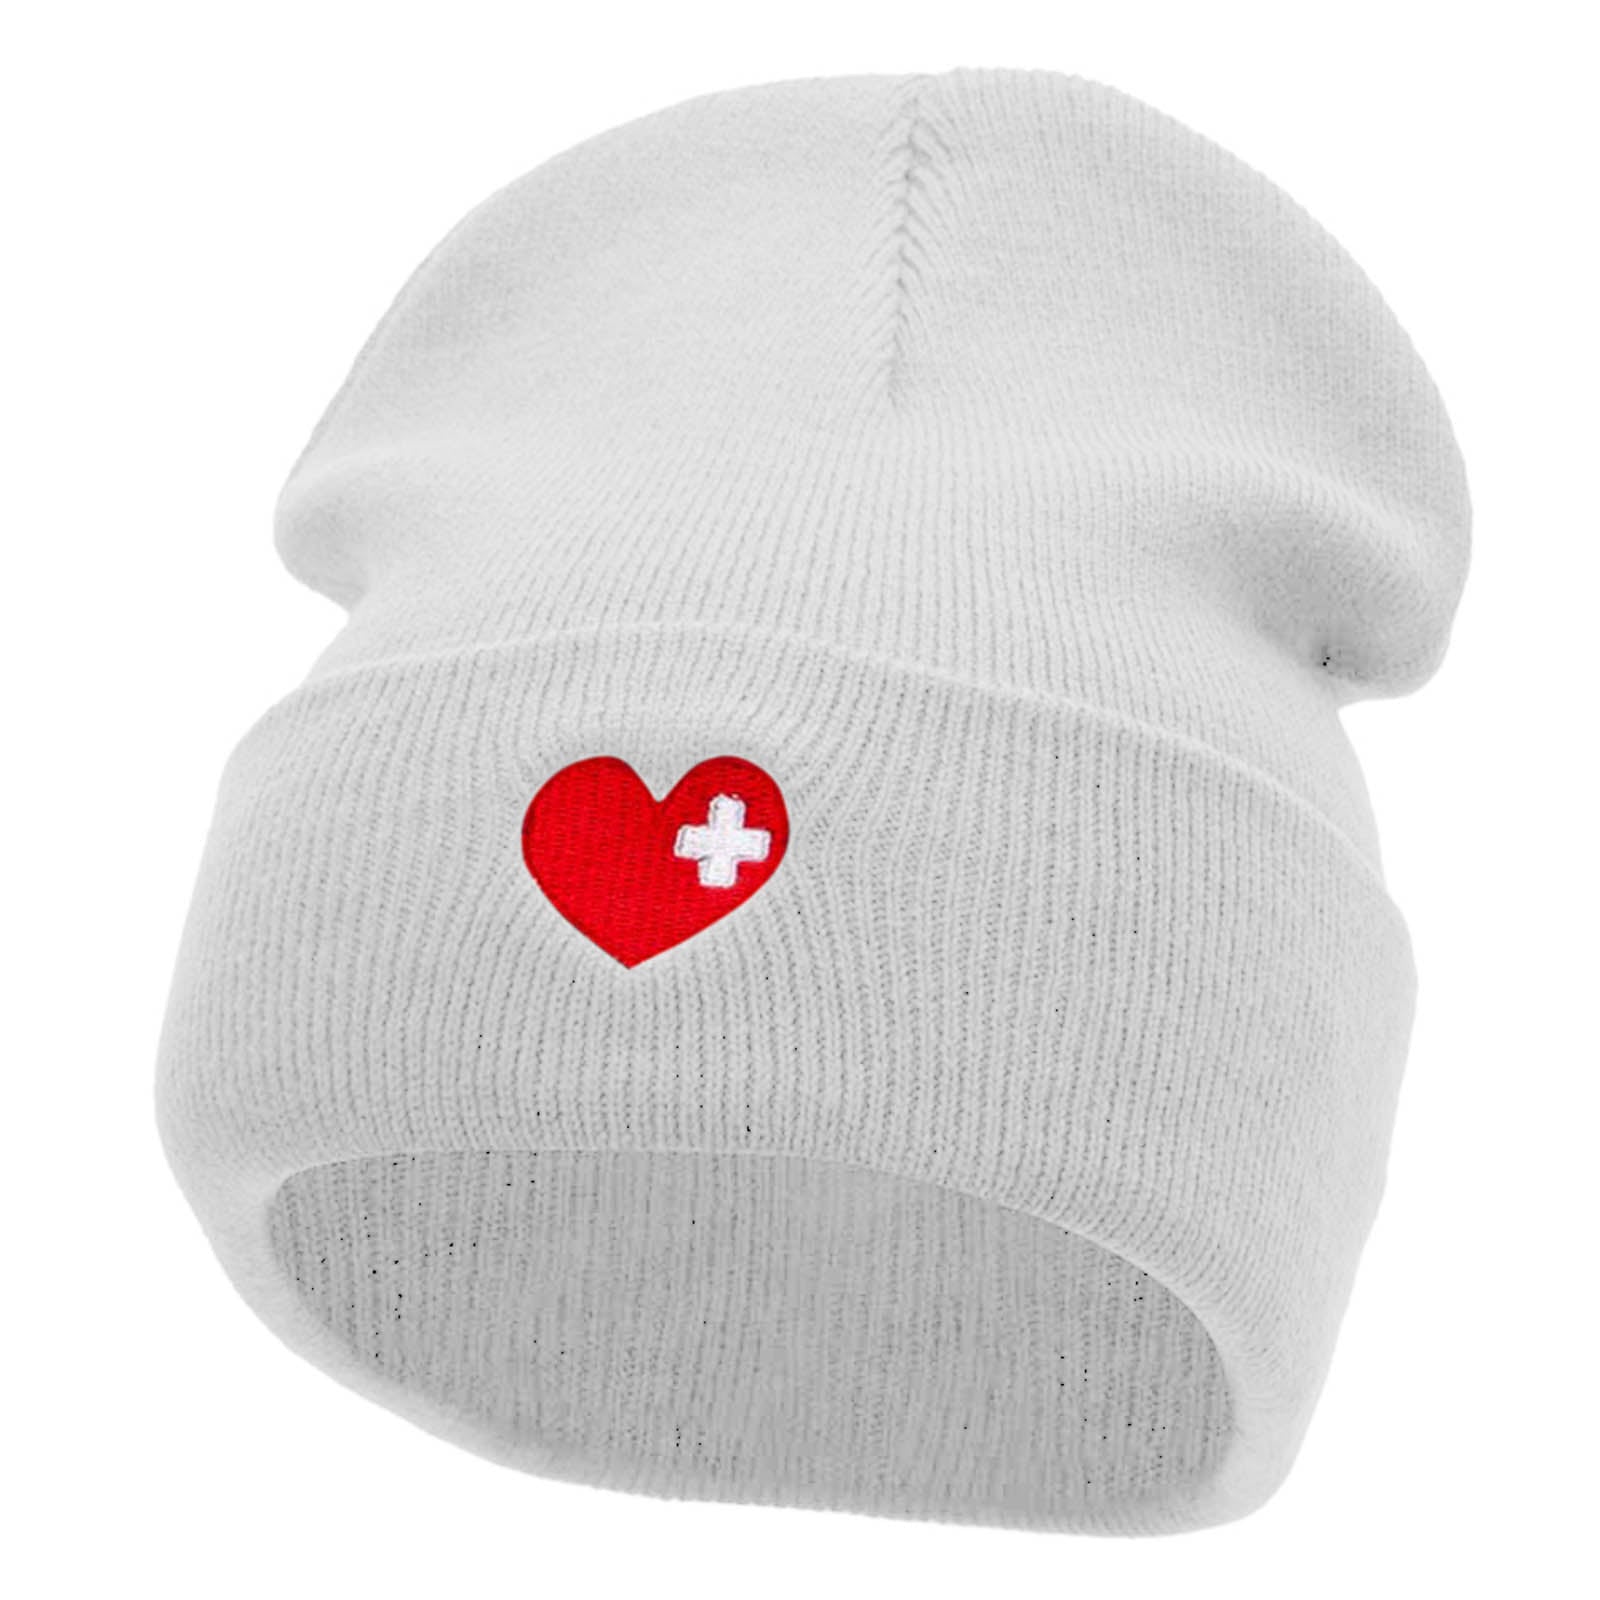 Medical Love Embroidered 12 Inch Long Knitted Beanie - White OSFM